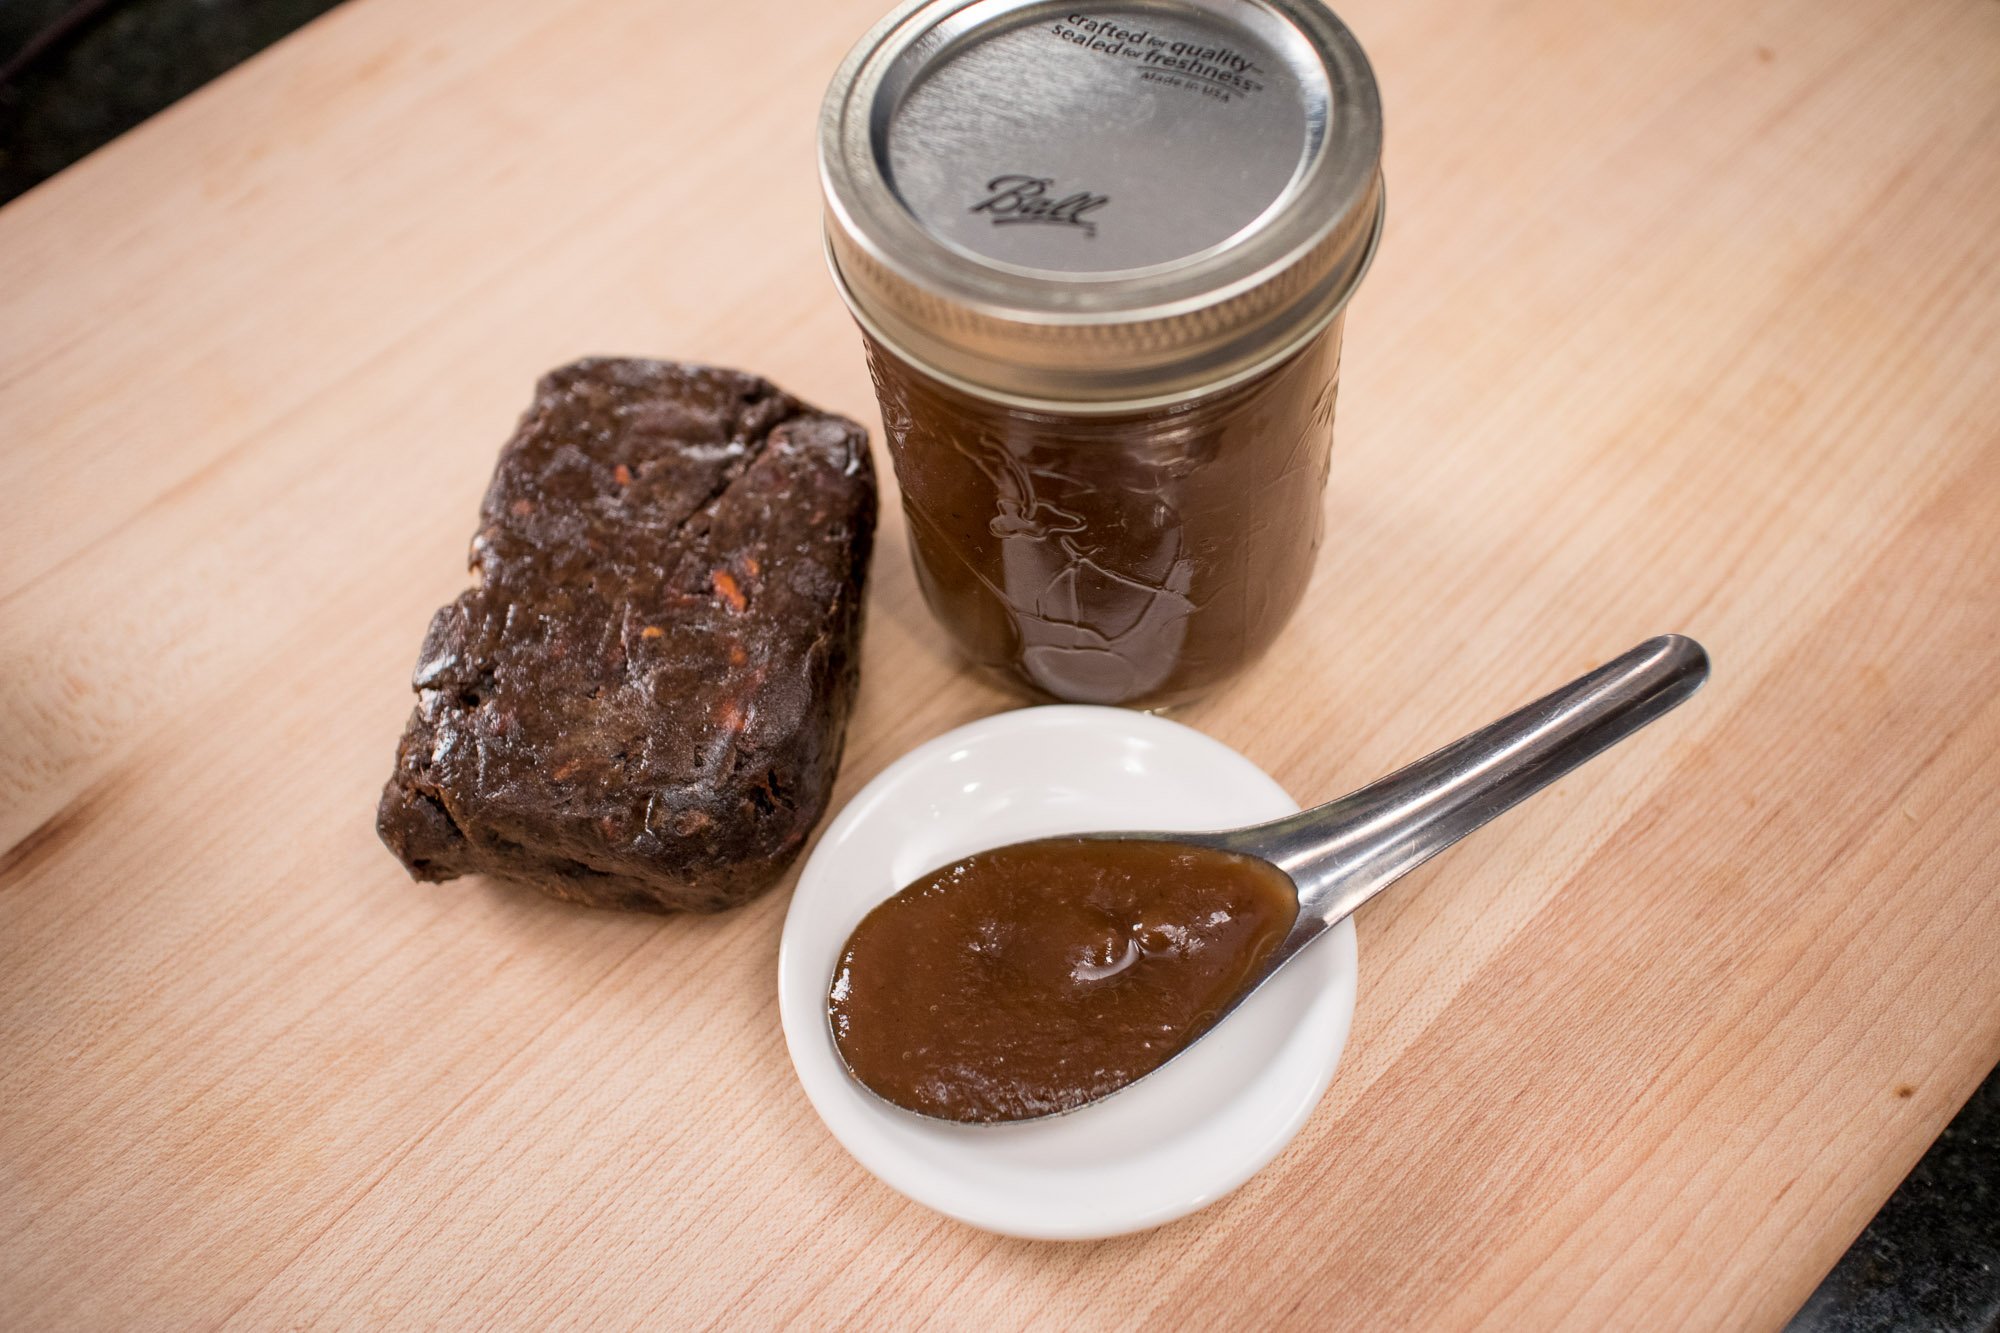 A block of tamarind pulp, a jar of tamarind paste, and a spoon filled with tamarind paste.